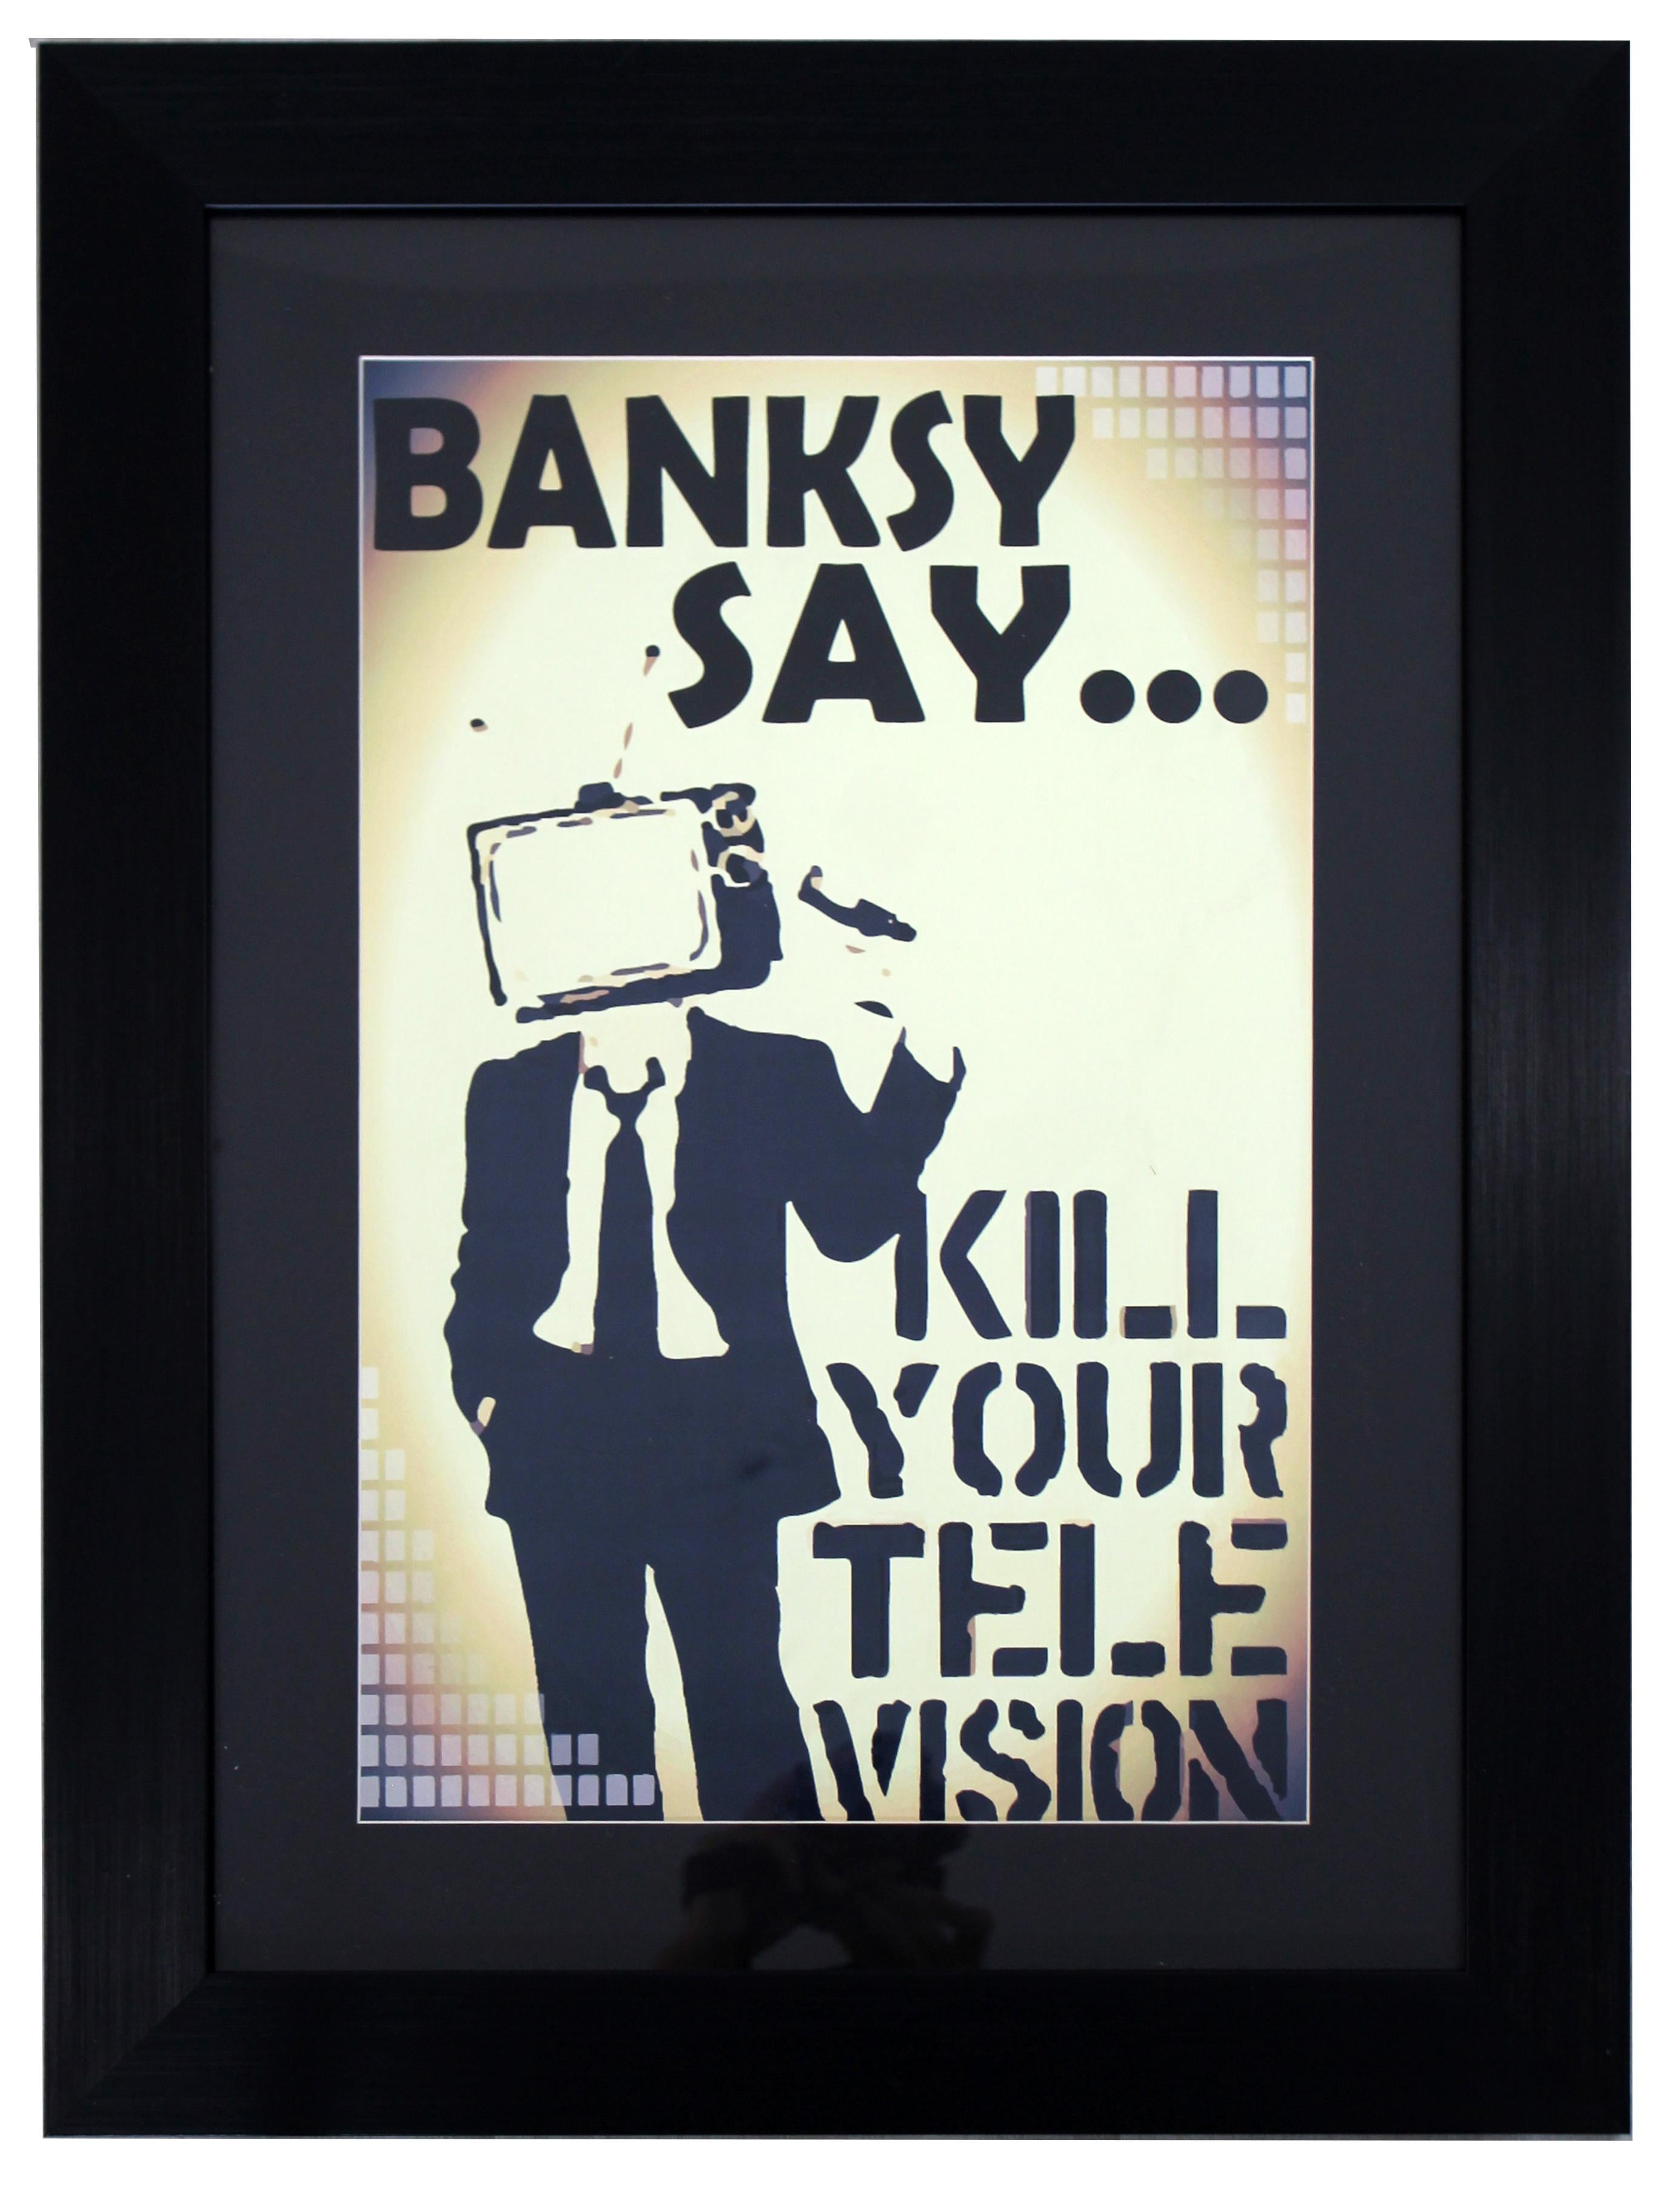 Paper Contemporary Framed Banksy Offset Lithograph Kill Your Television Graffiti Art